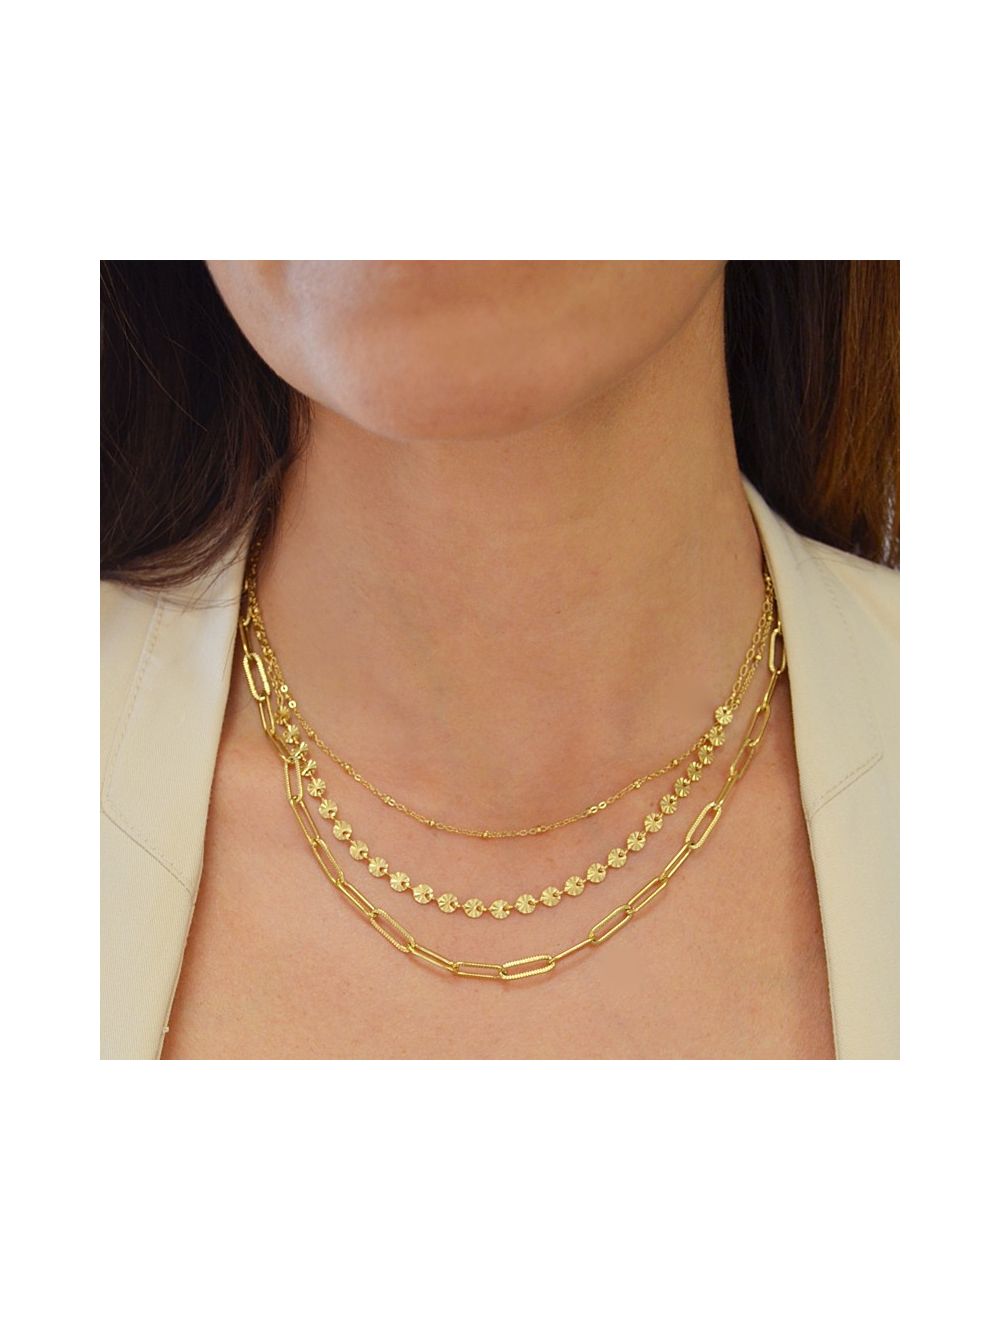 Triple Chic 14K Gold Plated Necklace